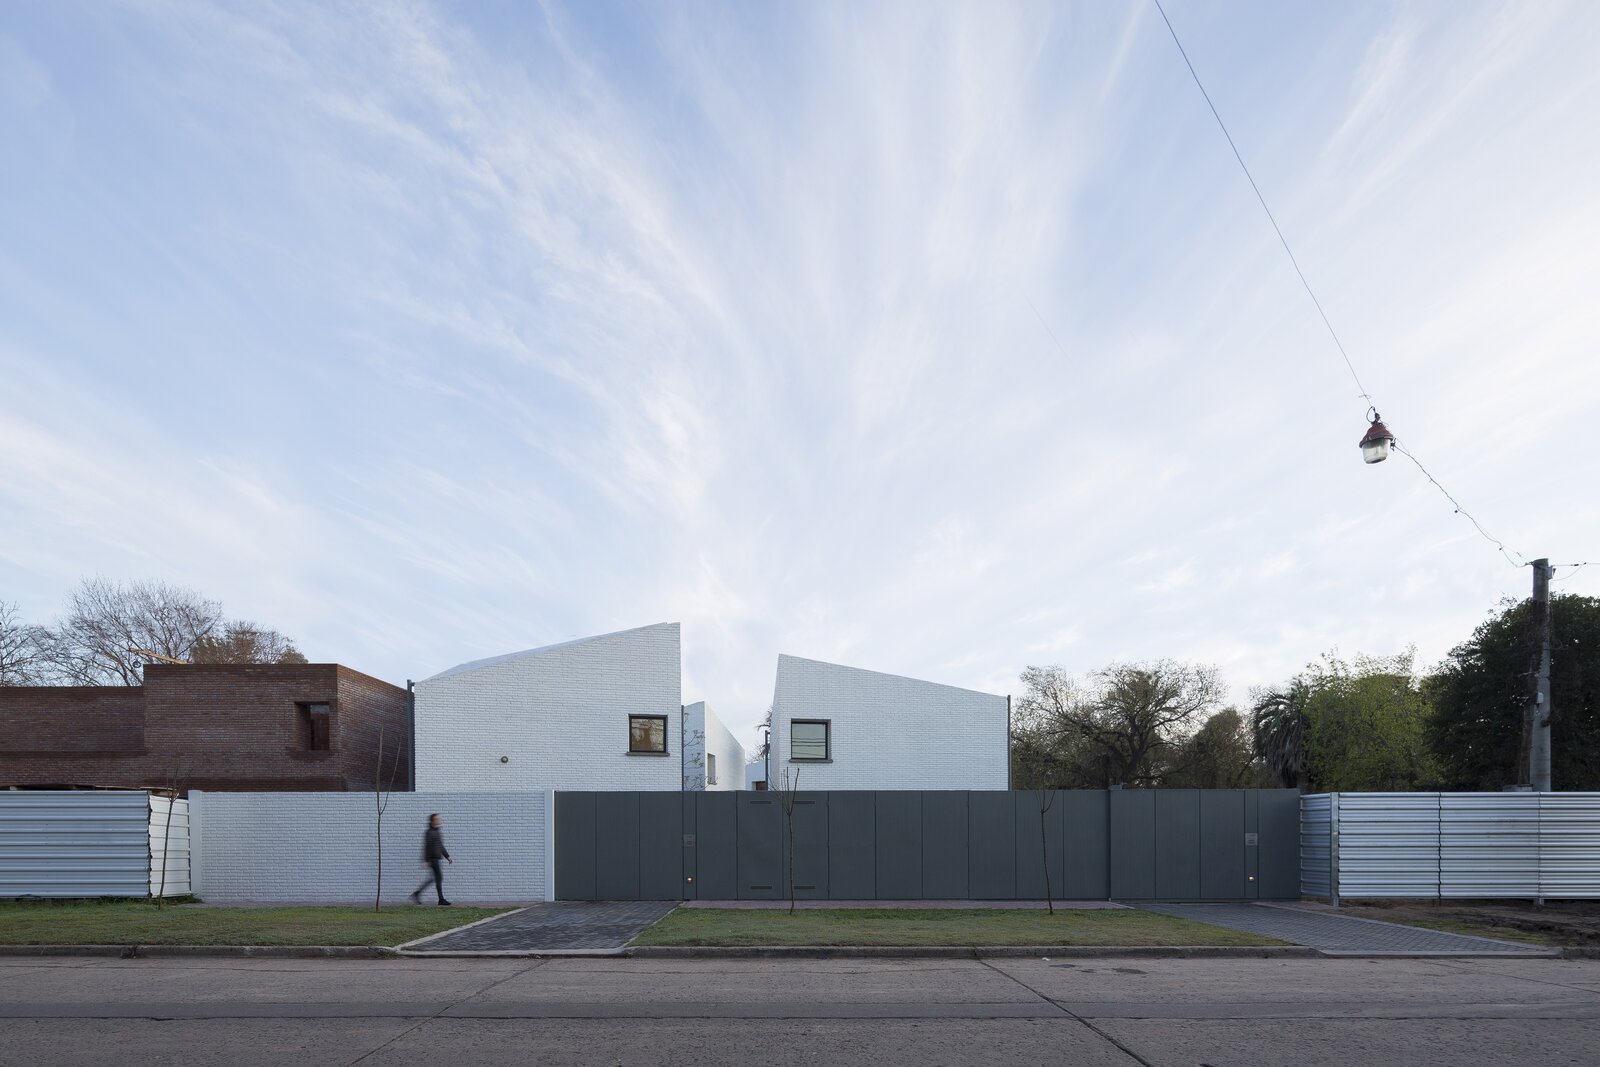 In Argentina, Seven Homes Pop Up on 16,000 Square Feet